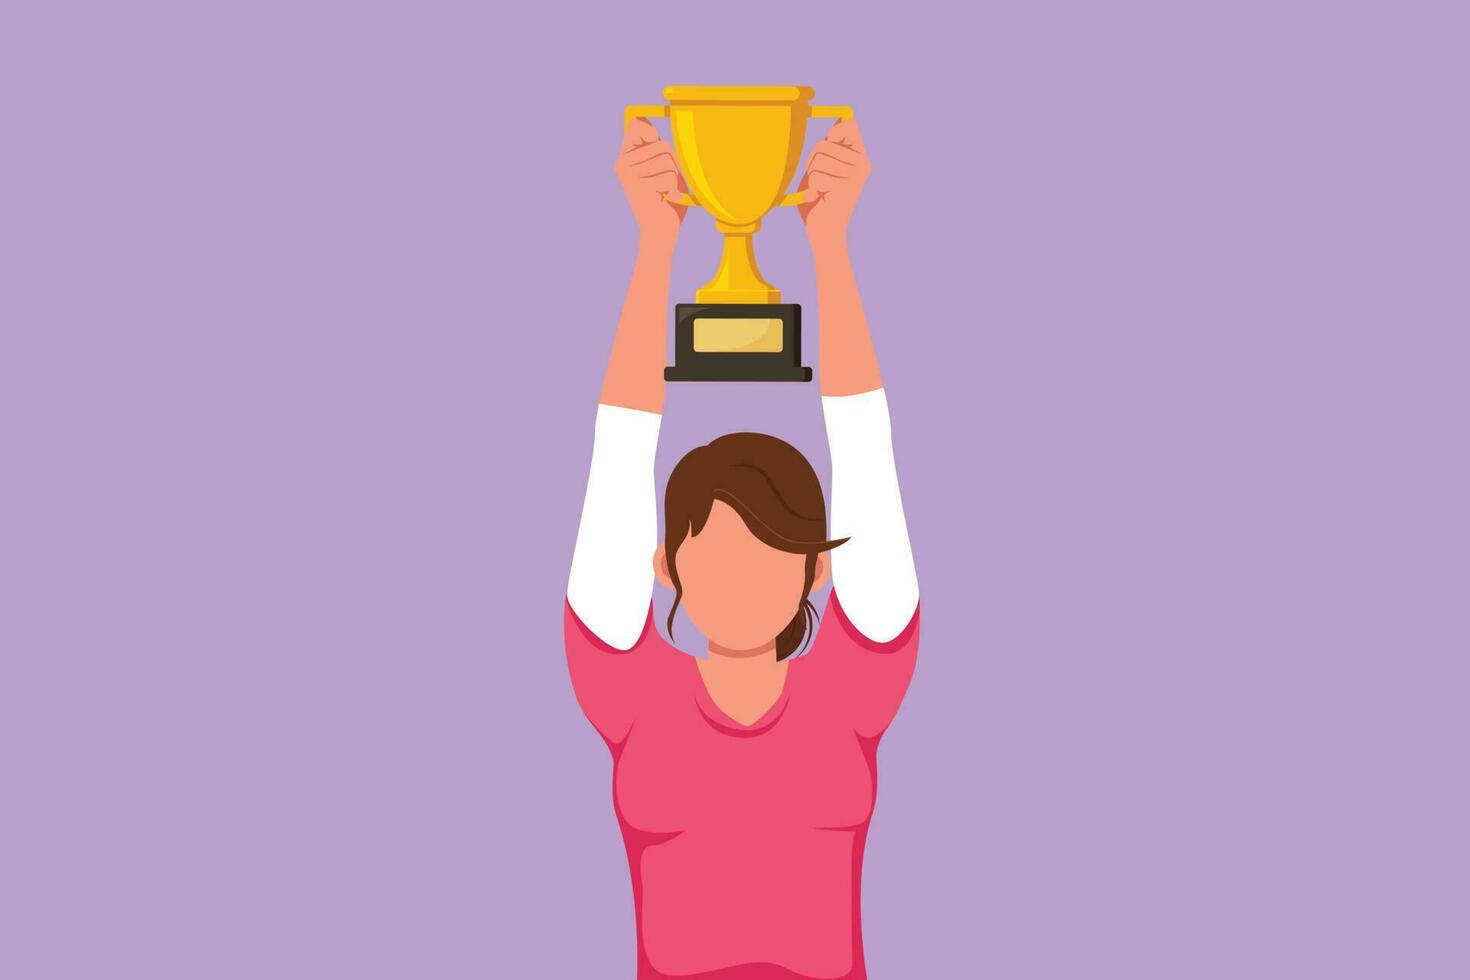 Character flat drawing female athlete wearing sport jersey lifting gold trophy with both hands. Happy woman celebrating victory of national competition championship. Cartoon design vector illustration